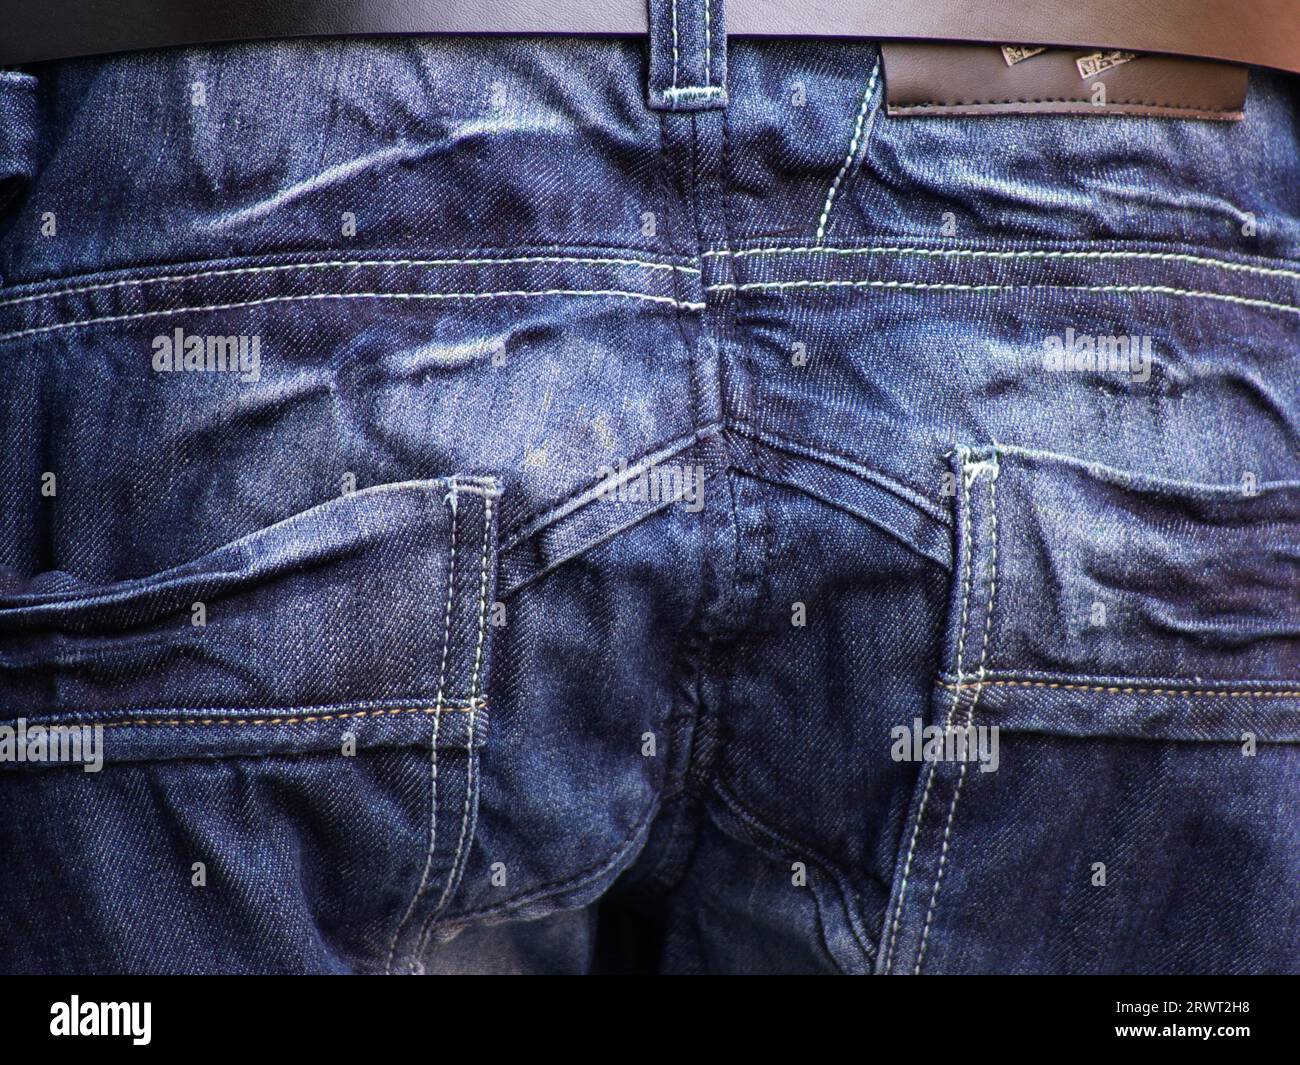 Back view of a pair of blue washed jeans Stock Photo